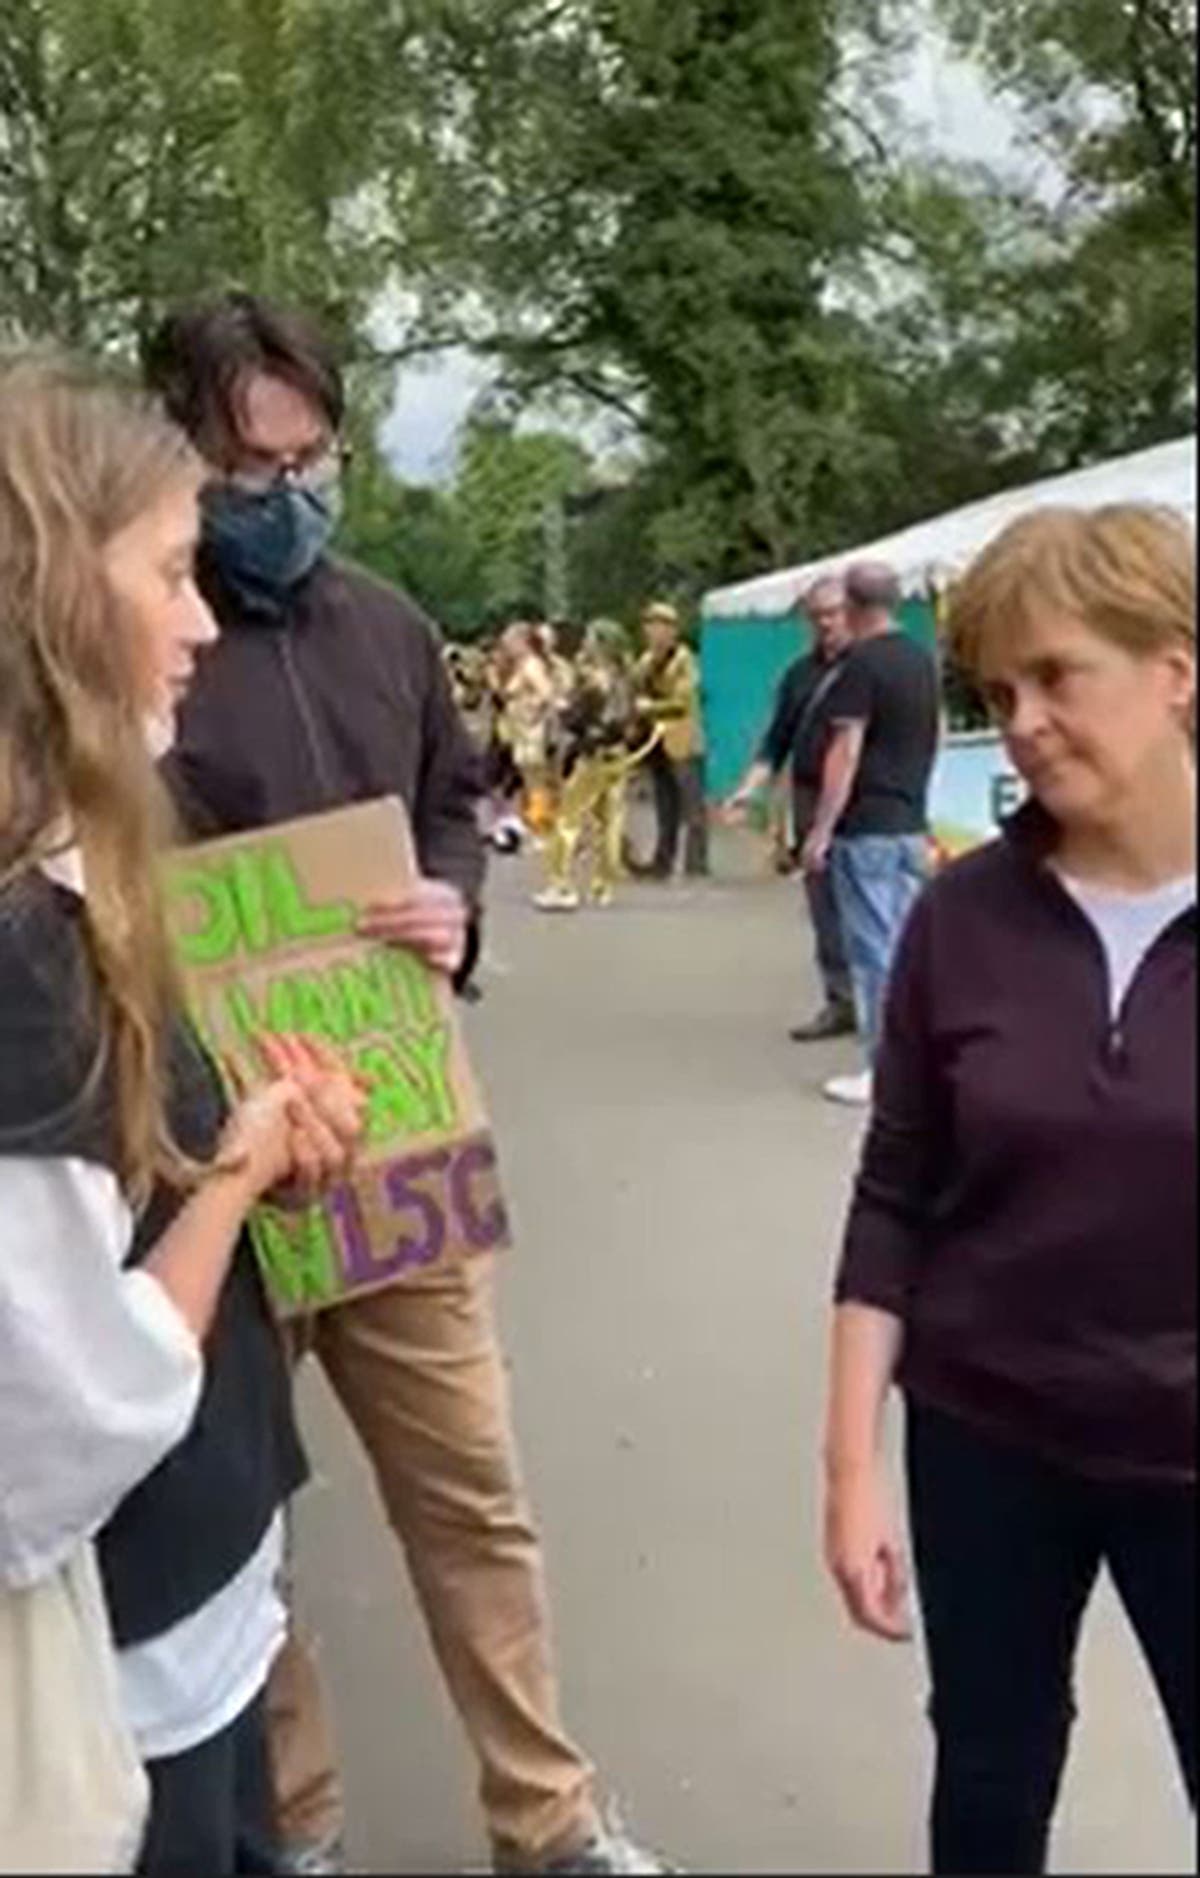 Nicola Sturgeon confronted by climate campaigners over failure to oppose Cambo oilfield